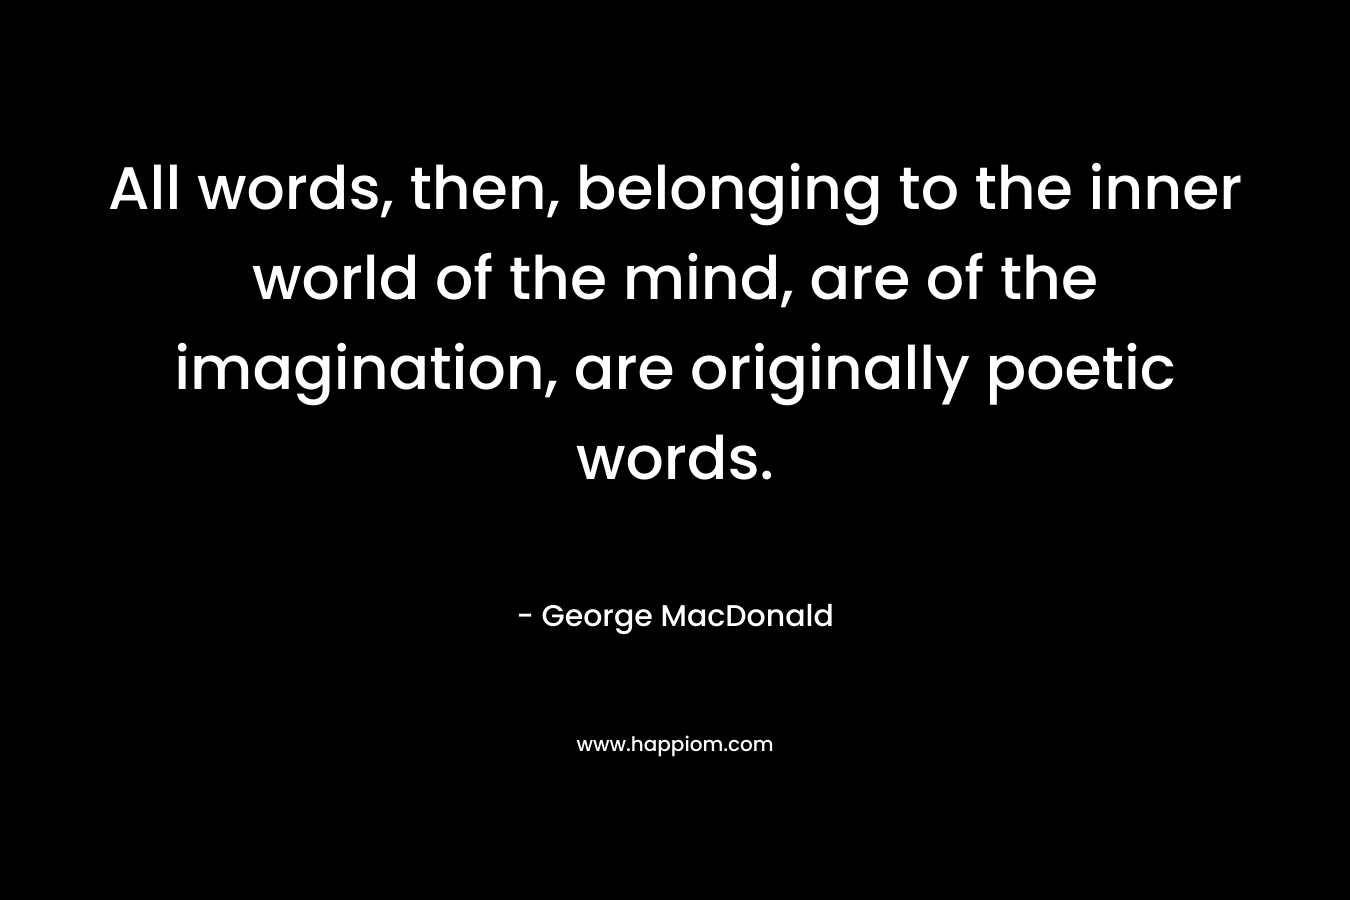 All words, then, belonging to the inner world of the mind, are of the imagination, are originally poetic words.